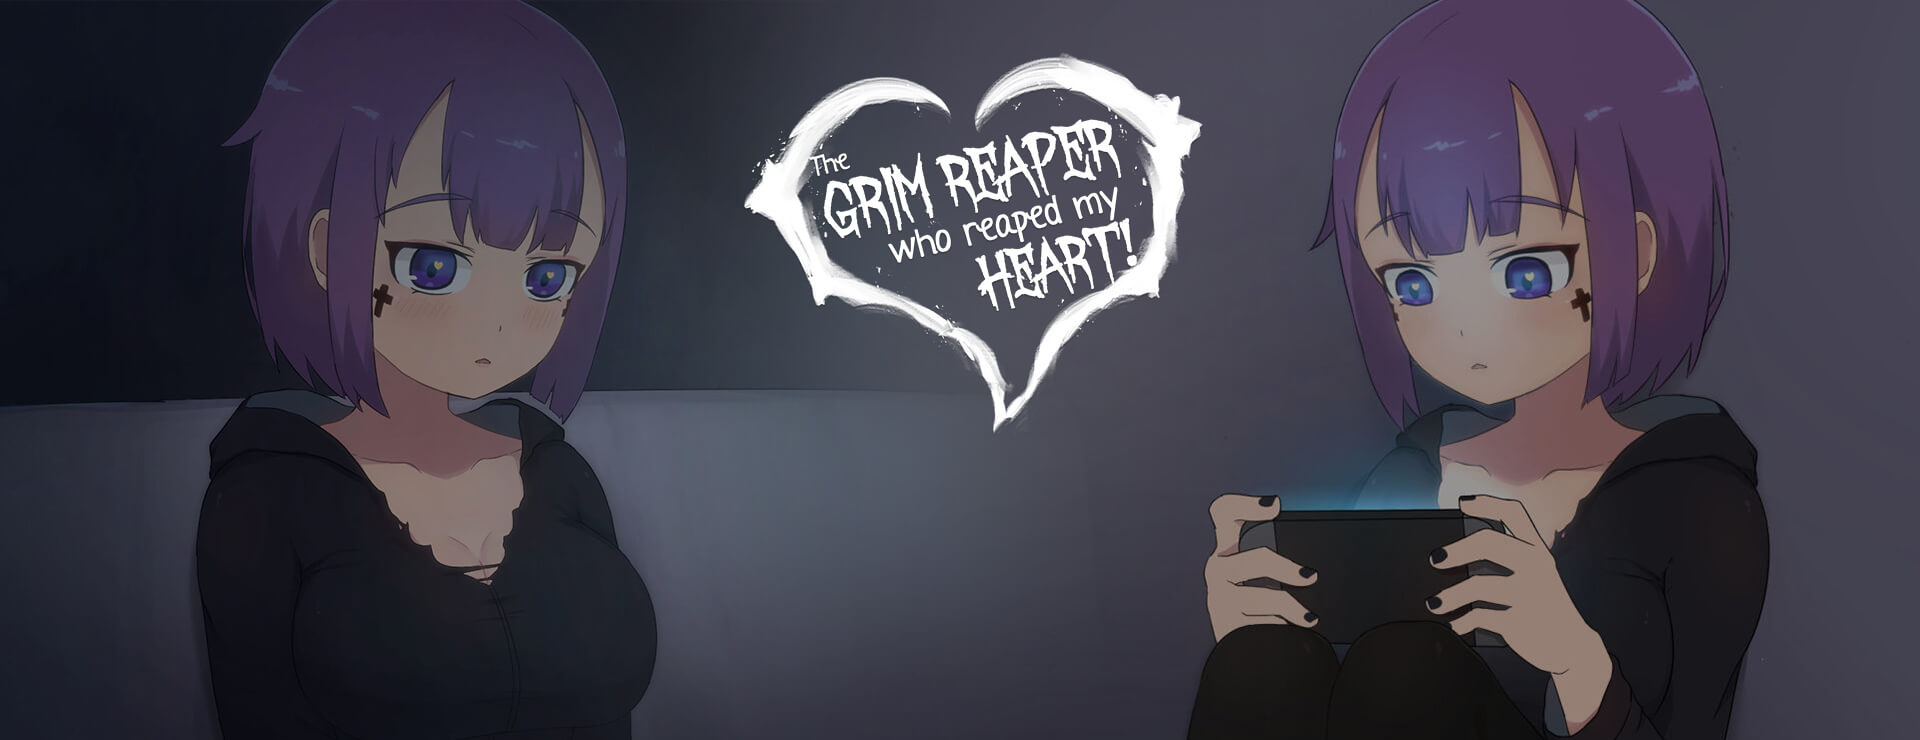 The Grim Reaper who Reaped my Heart! Swimsuit Version - Novela Visual Juego